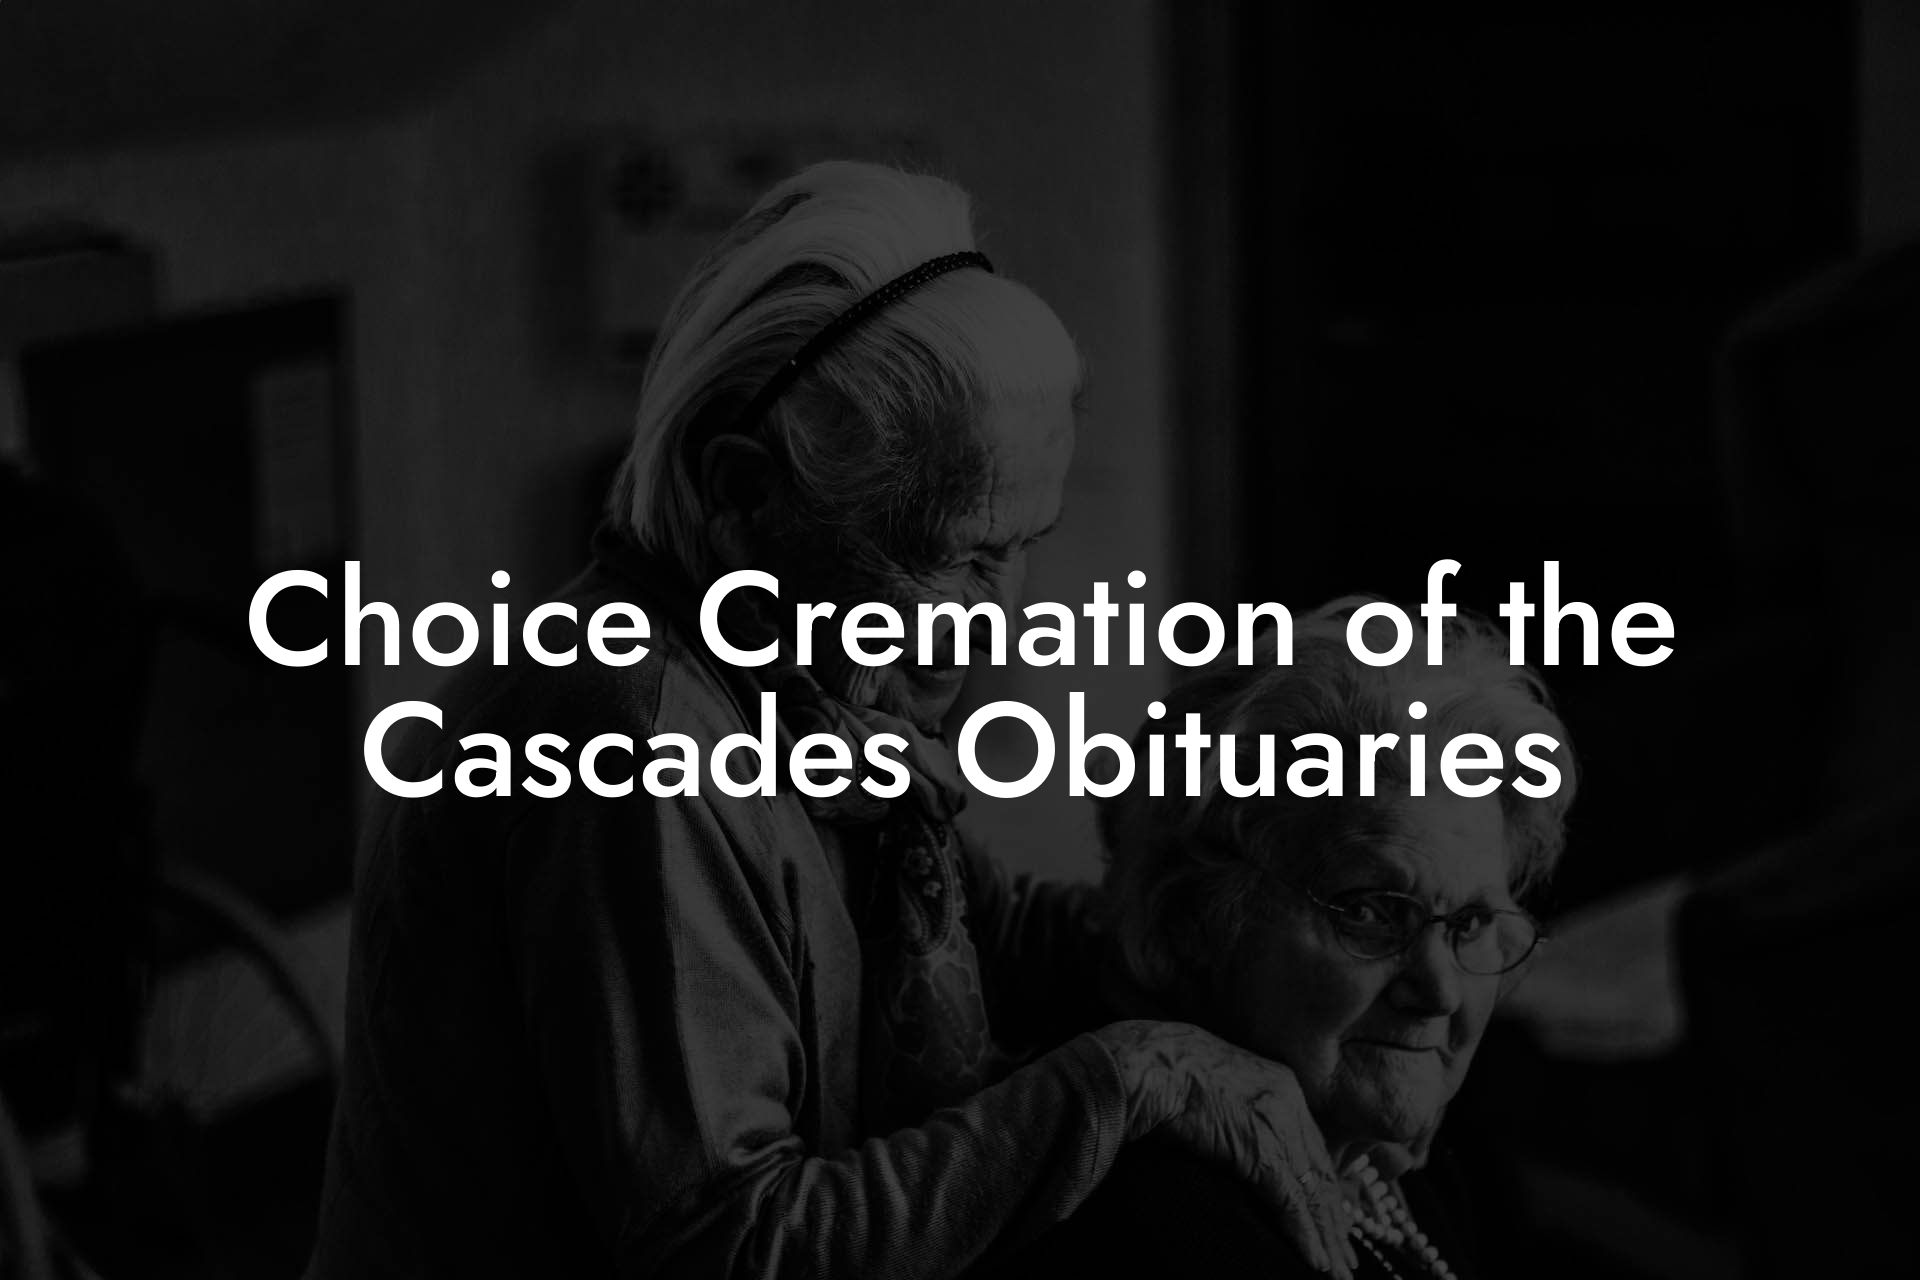 Choice Cremation of the Cascades Obituaries